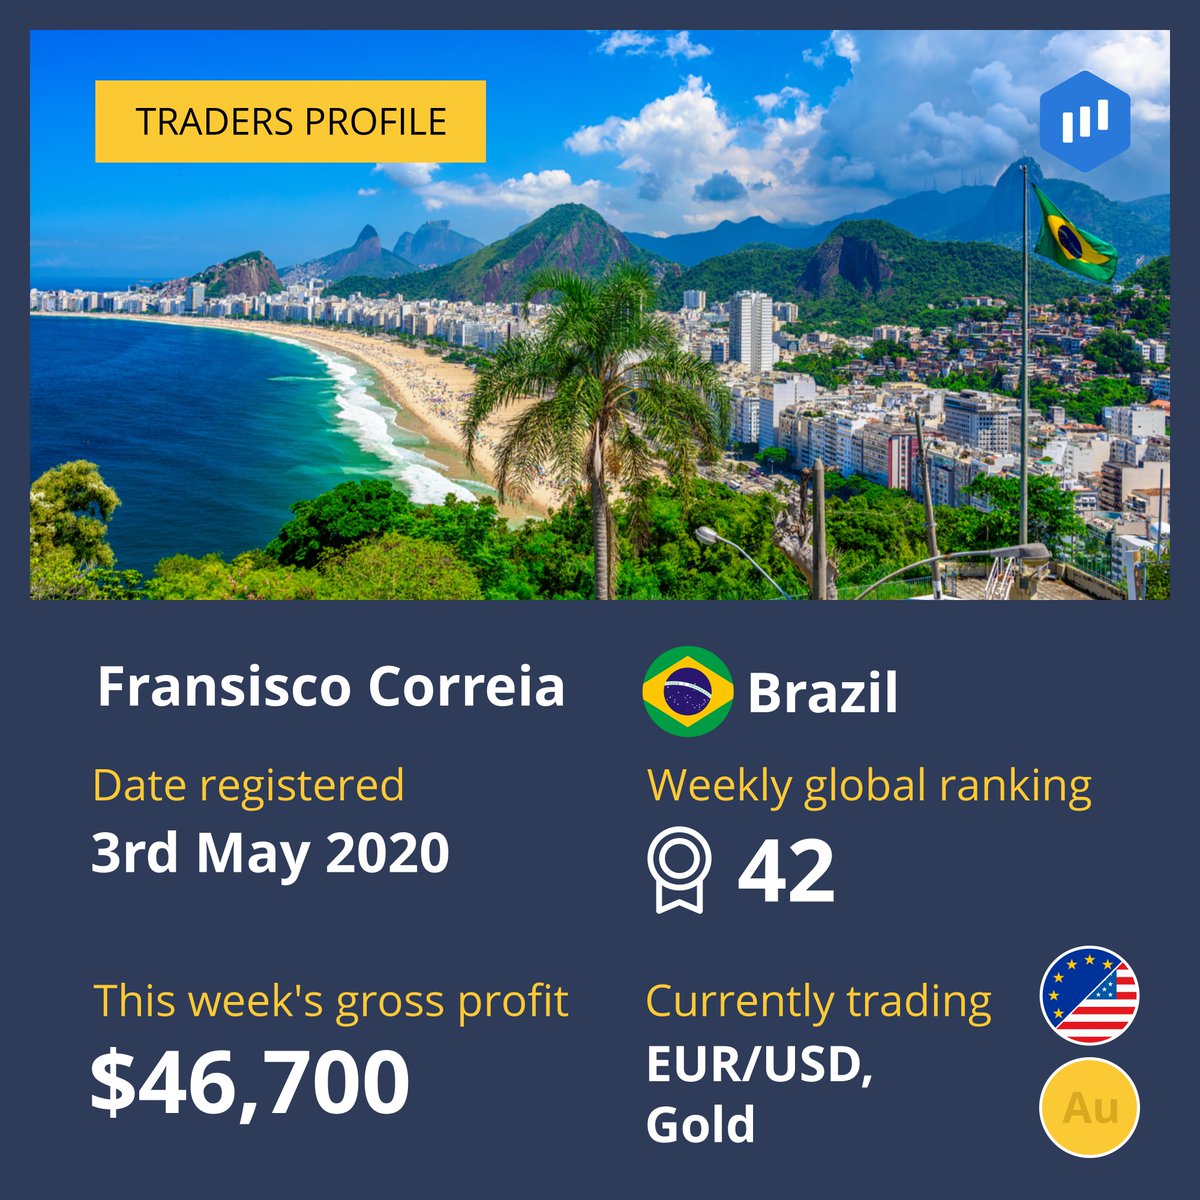 Looking for profitable assets to trade? Look no further than this Brazillian trader's profile. The resourceful trader opened profitable positions following an uptrend in the price of Gold & EUR/USD pair to earn a healthy profit.

Earn with ExpertOption: https://t.co/cqssvZU0wN https://t.co/dW3j4qQfur